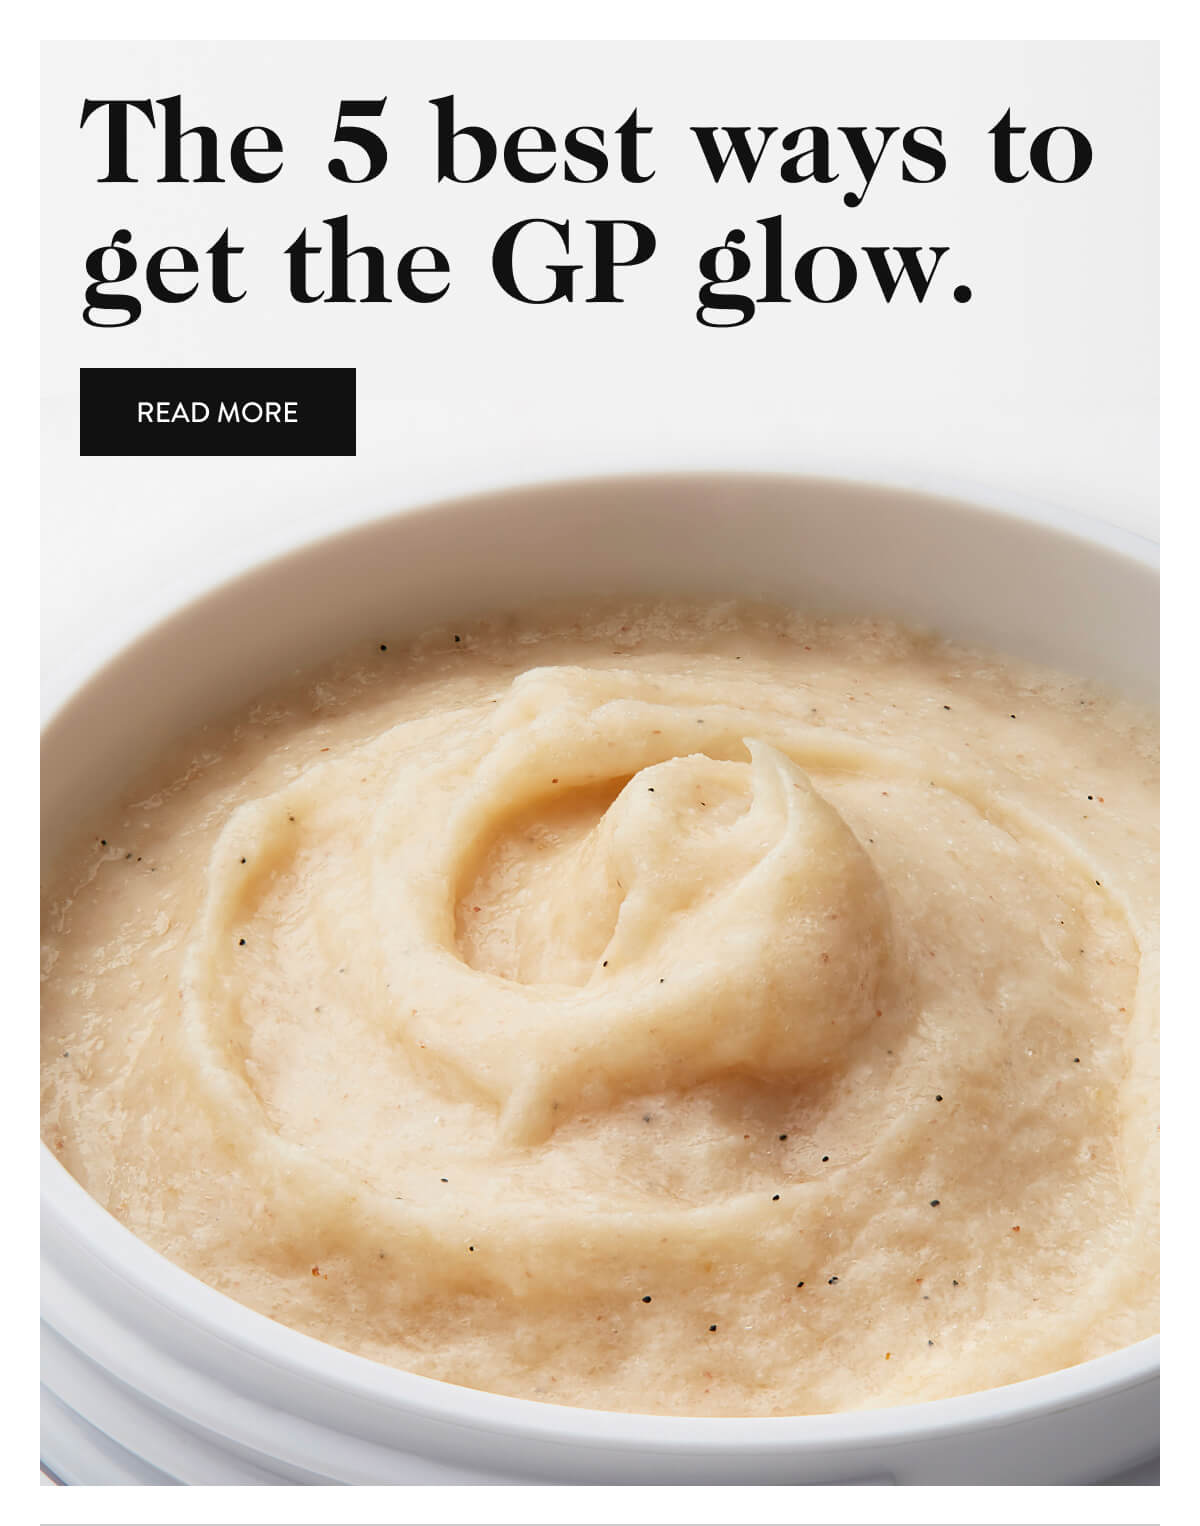 The 5 best ways to get the GP glow - Read More